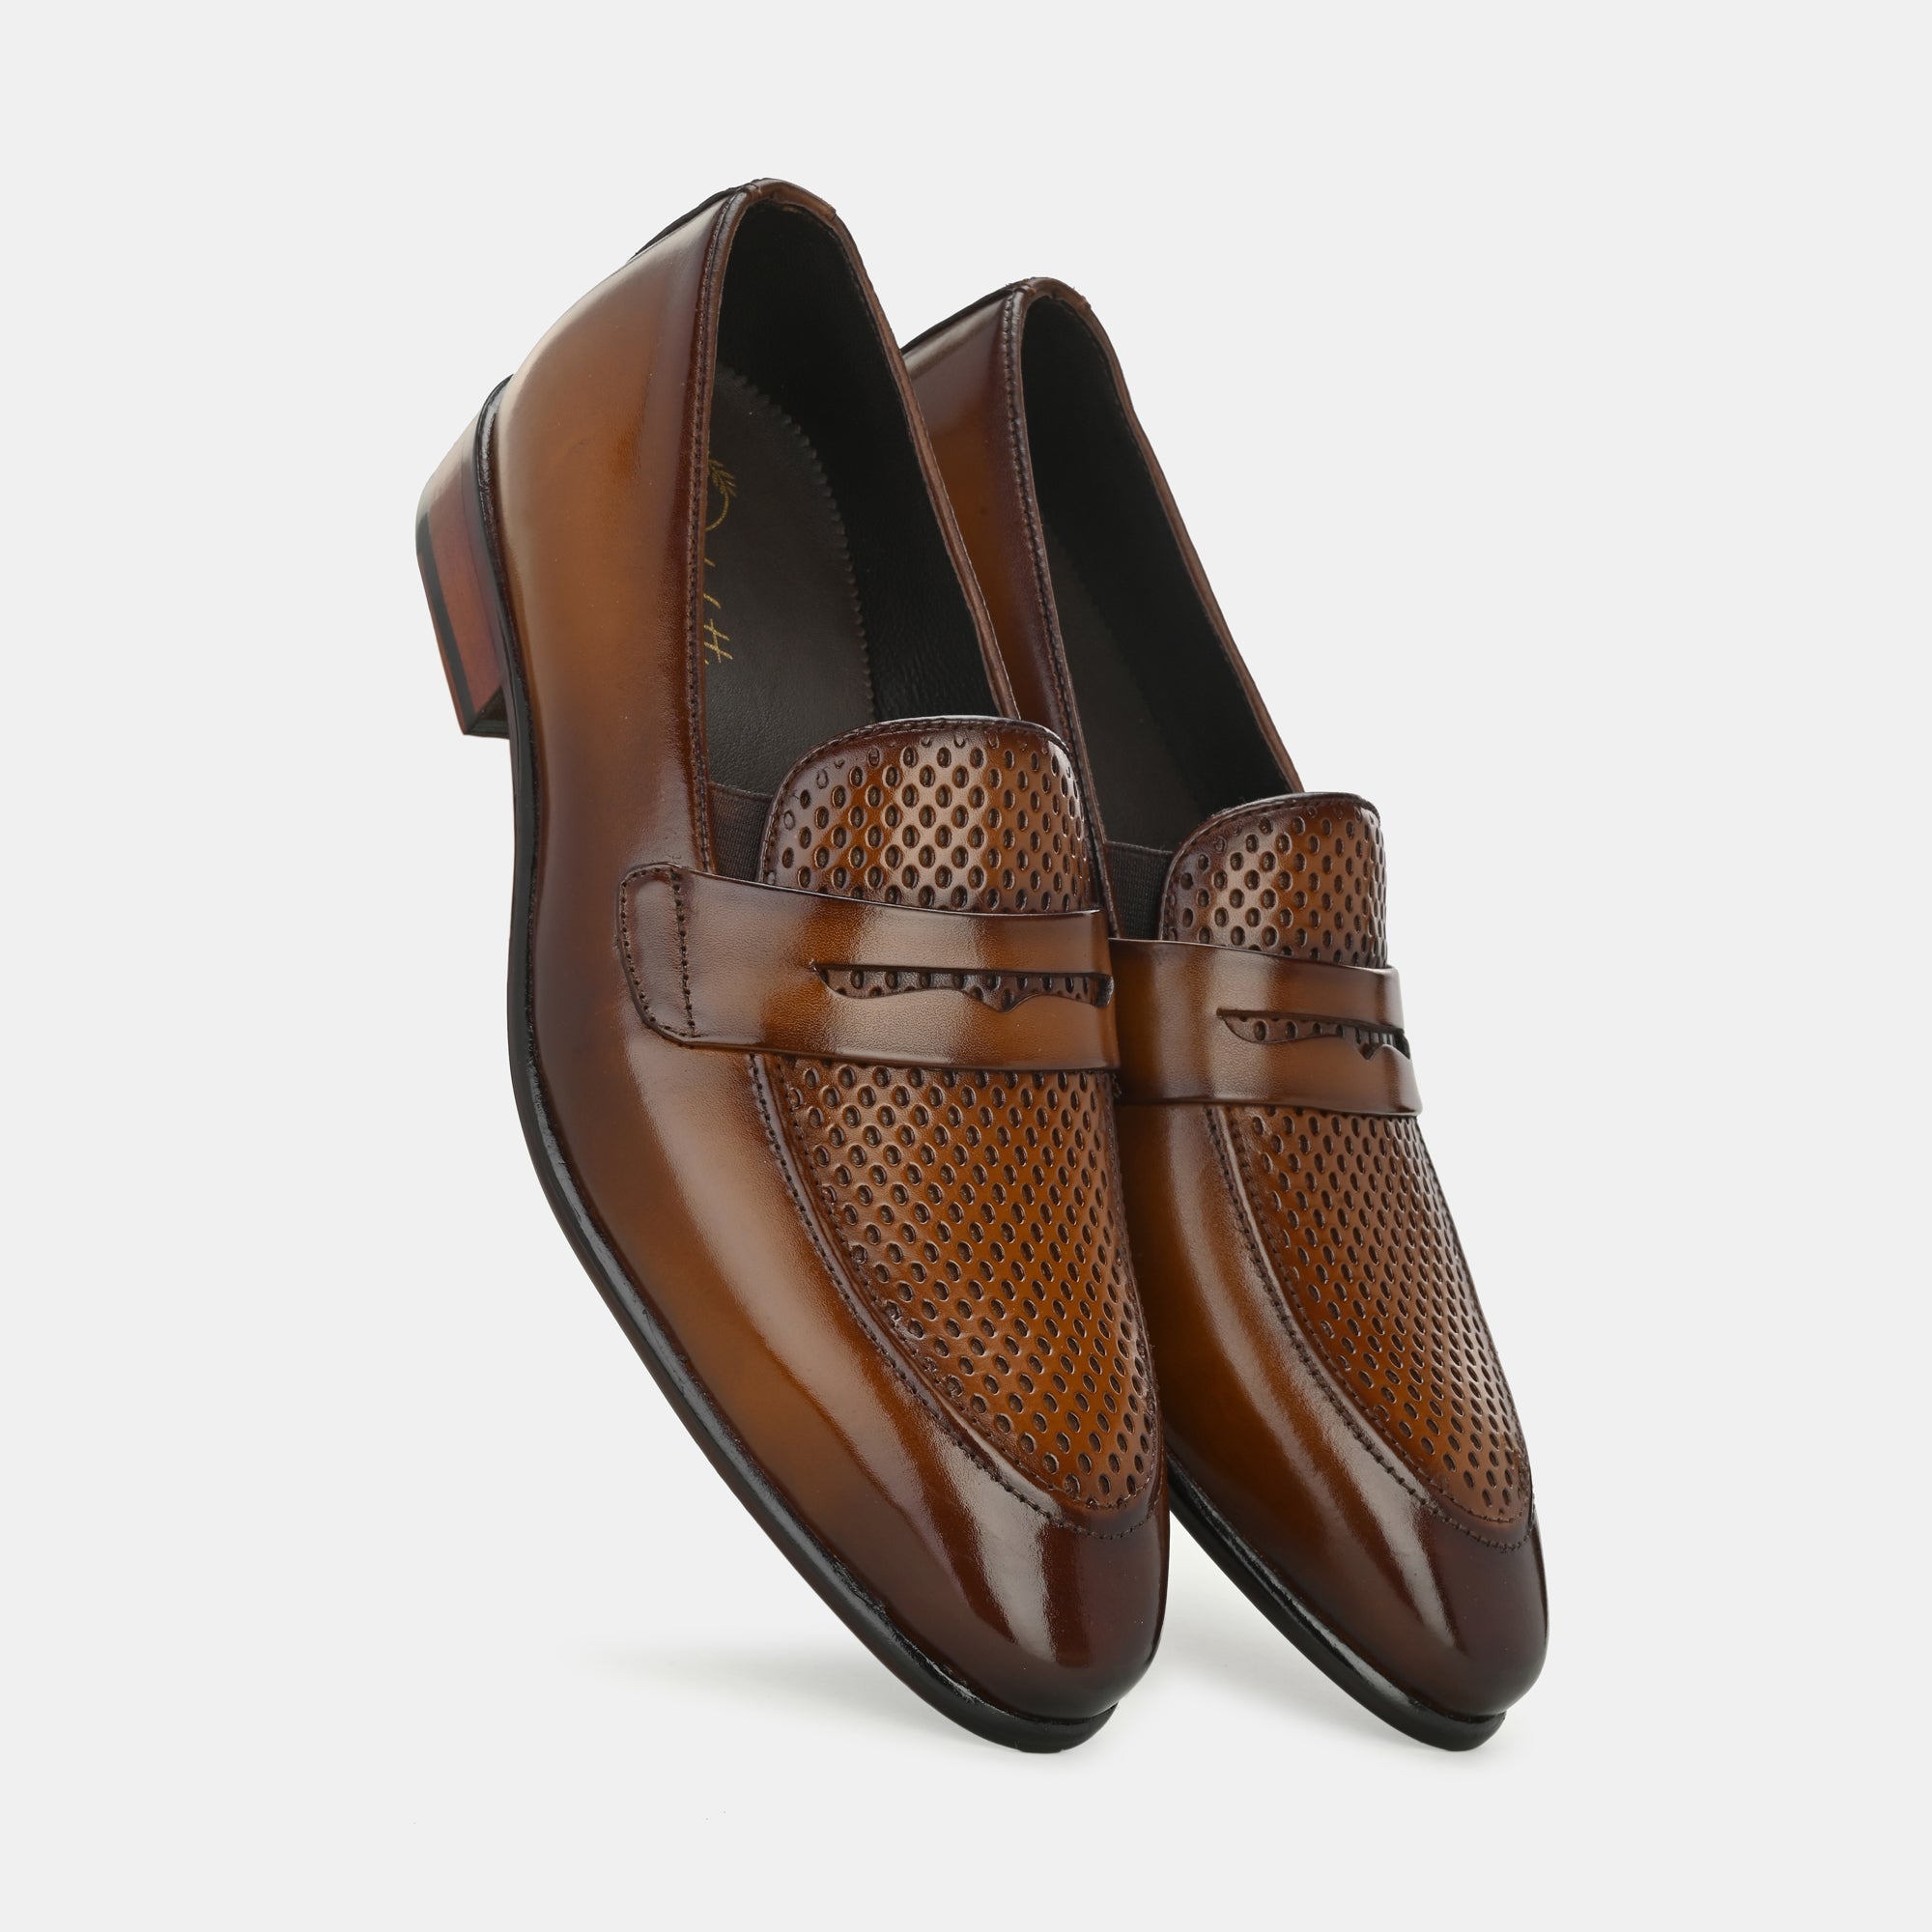 Tan Perforated Penny Loafers by Lafattio